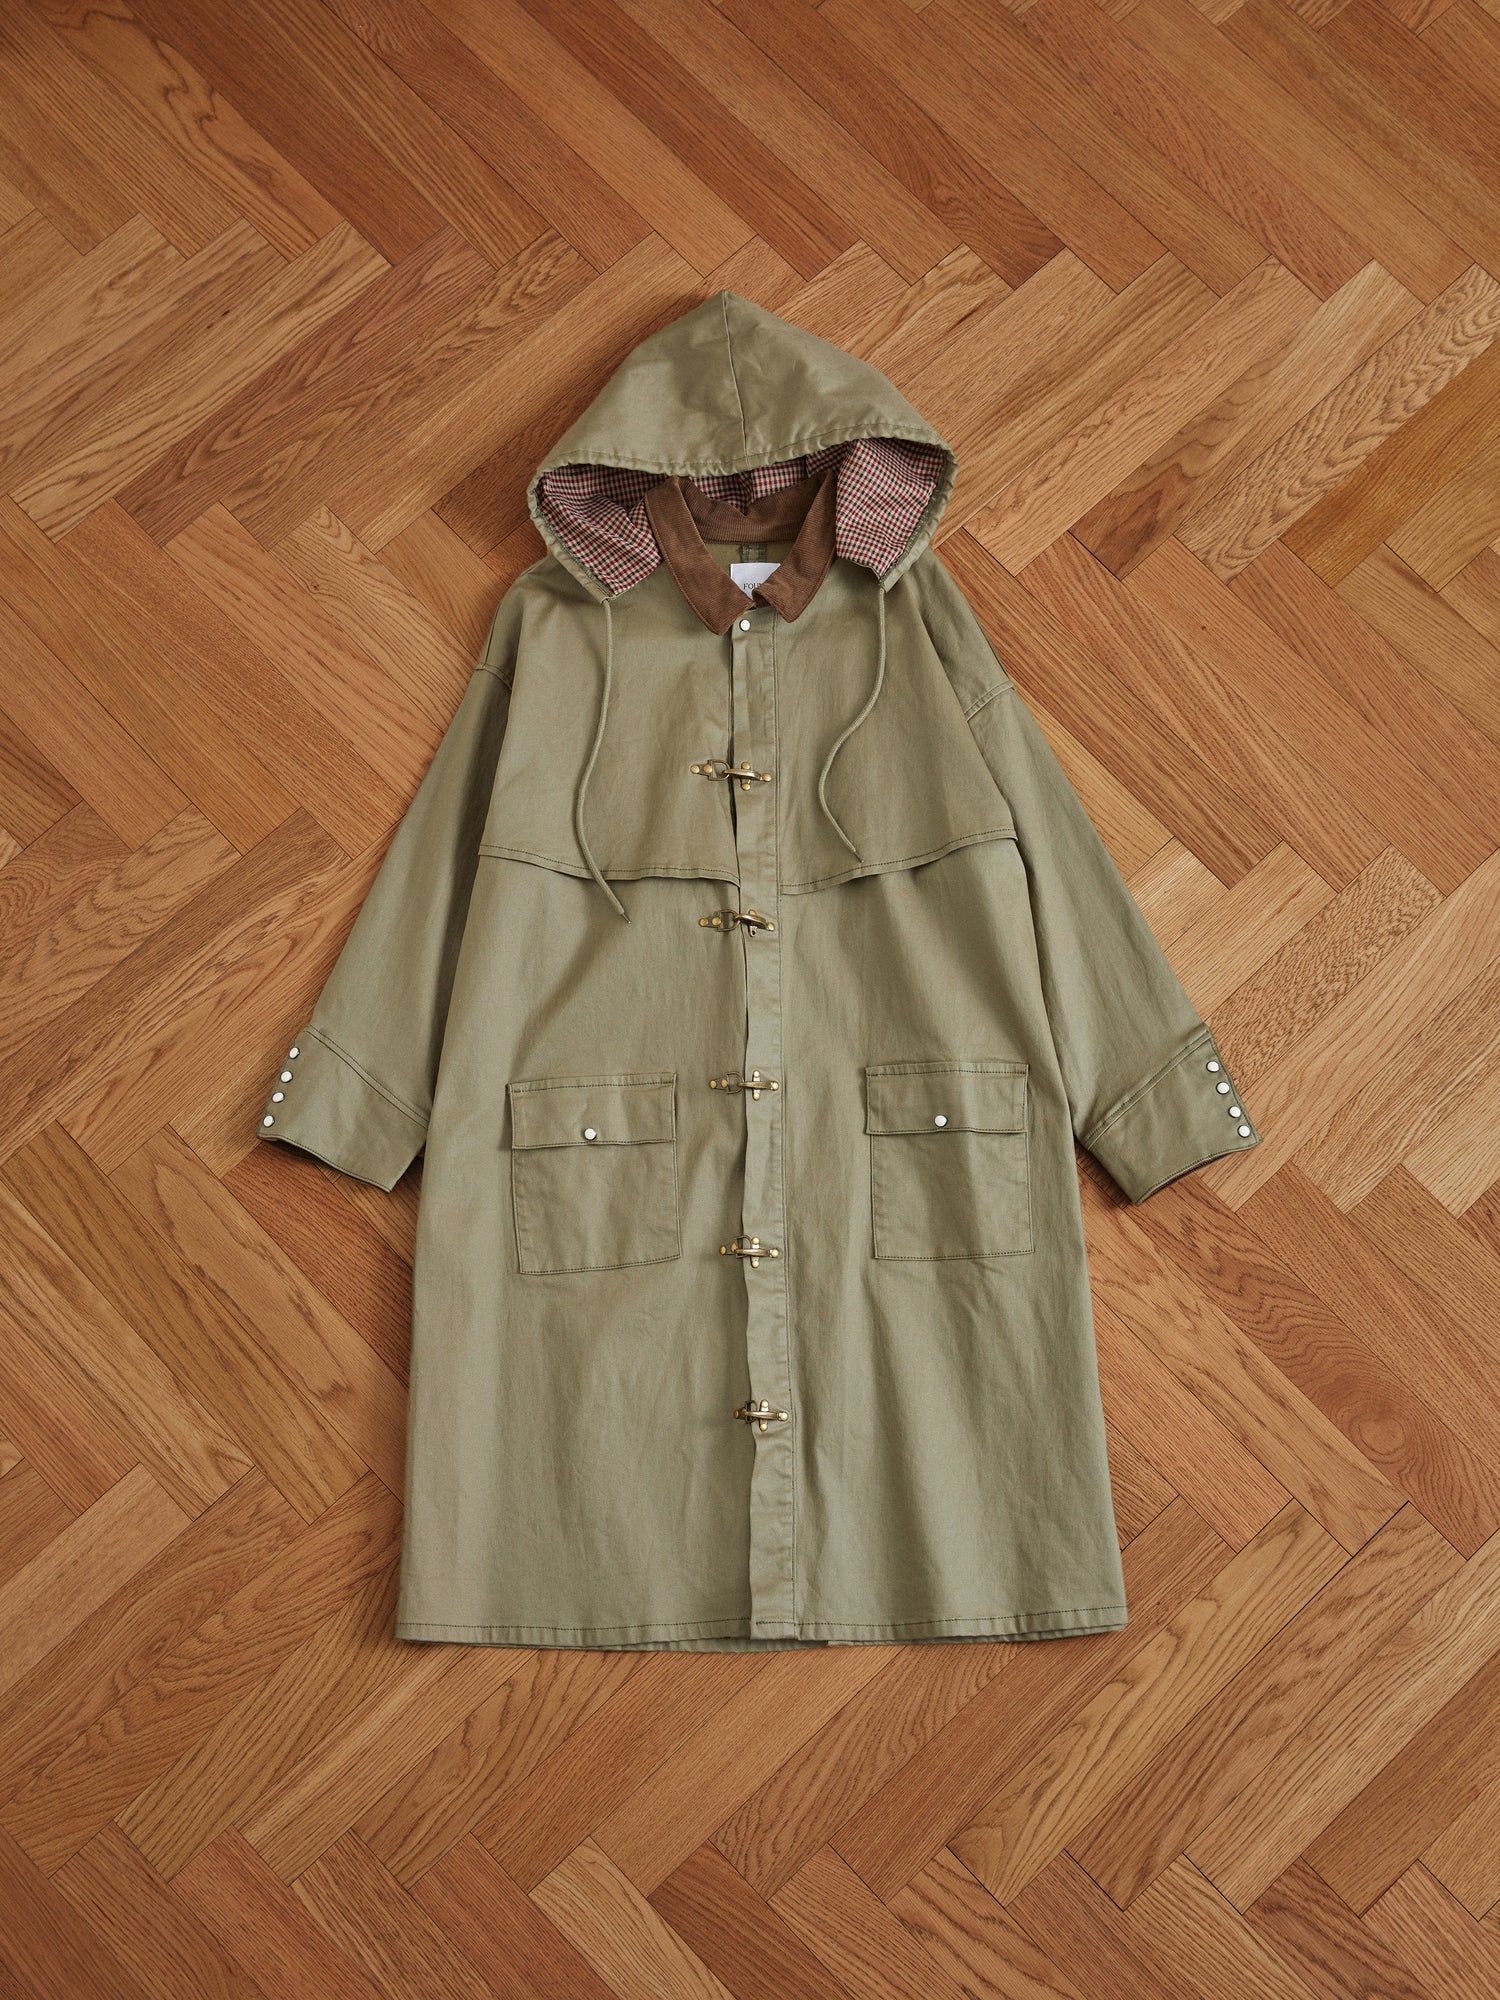 A green Prairie Buckle Coat made of waxed cotton lays on a wooden floor, showcasing its water resistance by Found.